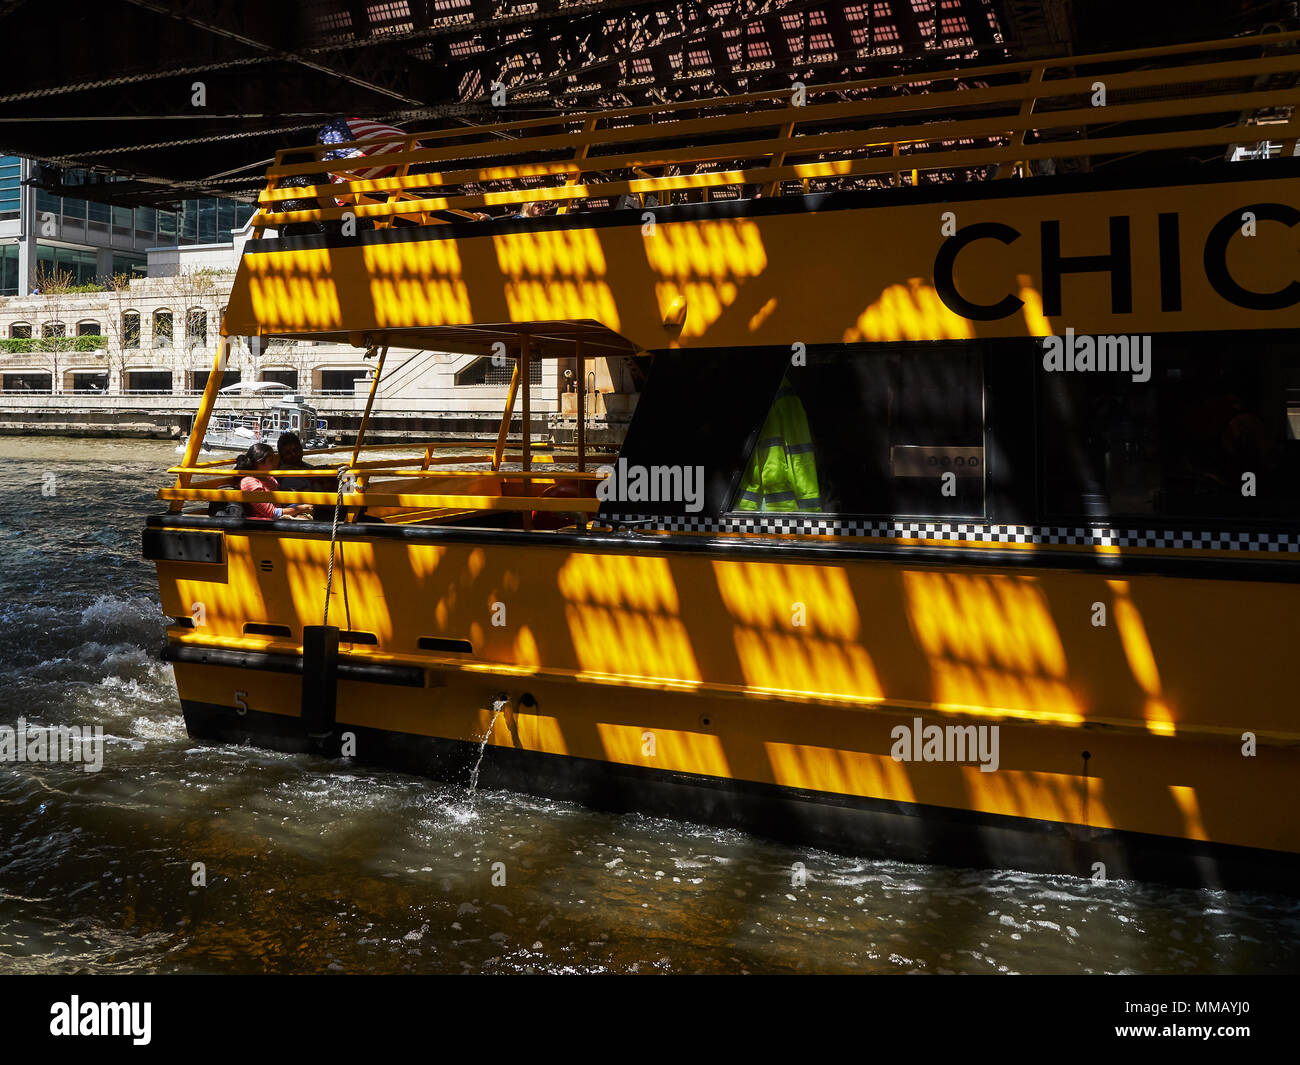 Chicago water taxi on the Chicago River Stock Photo